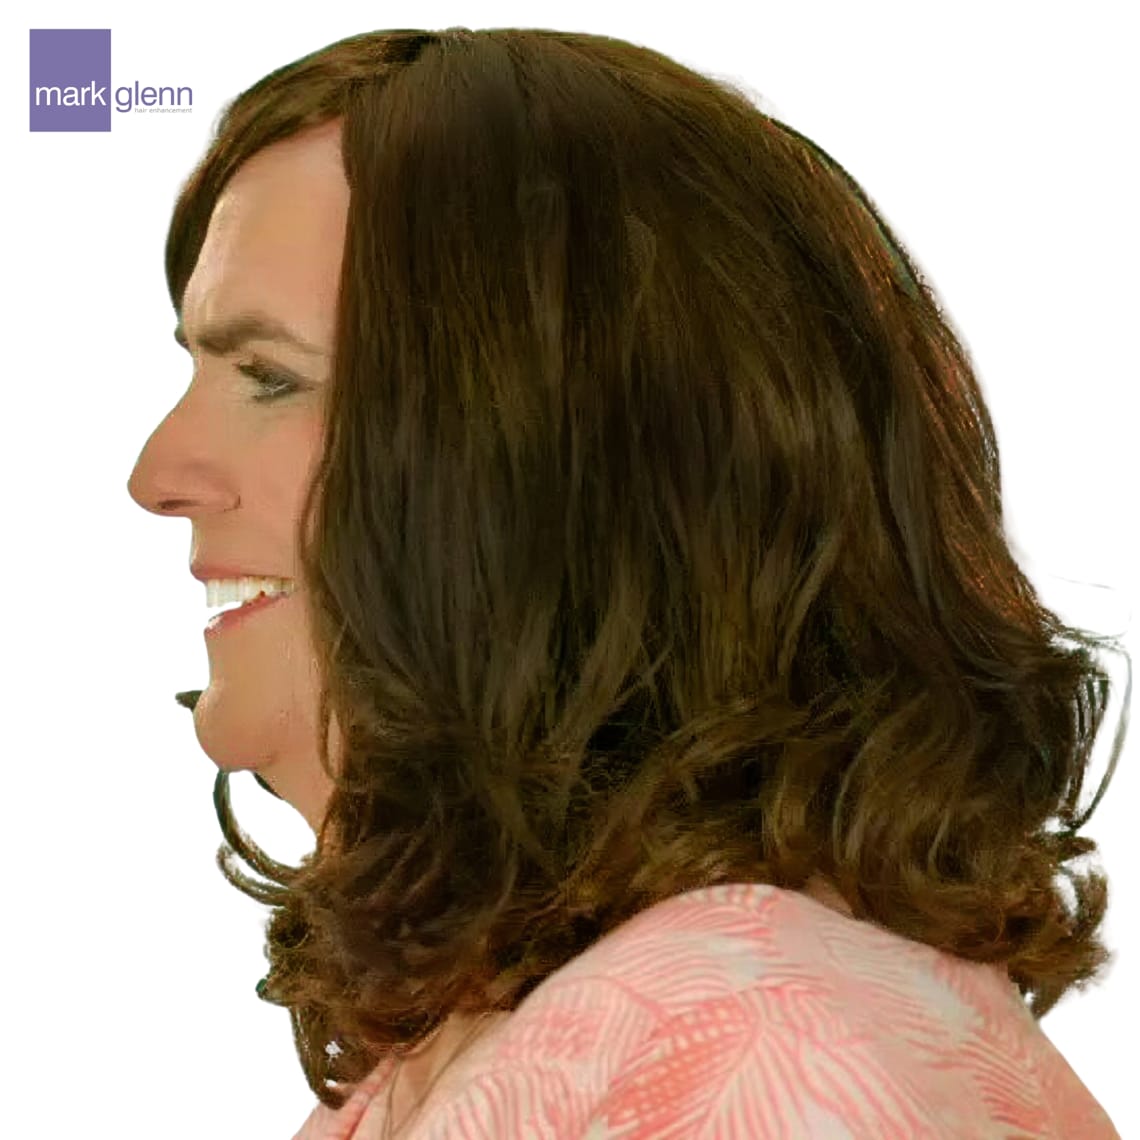 After Picture - 'The Making of Me' - C4 Gender Change Documentary Features The Kinsey System Hair Integration